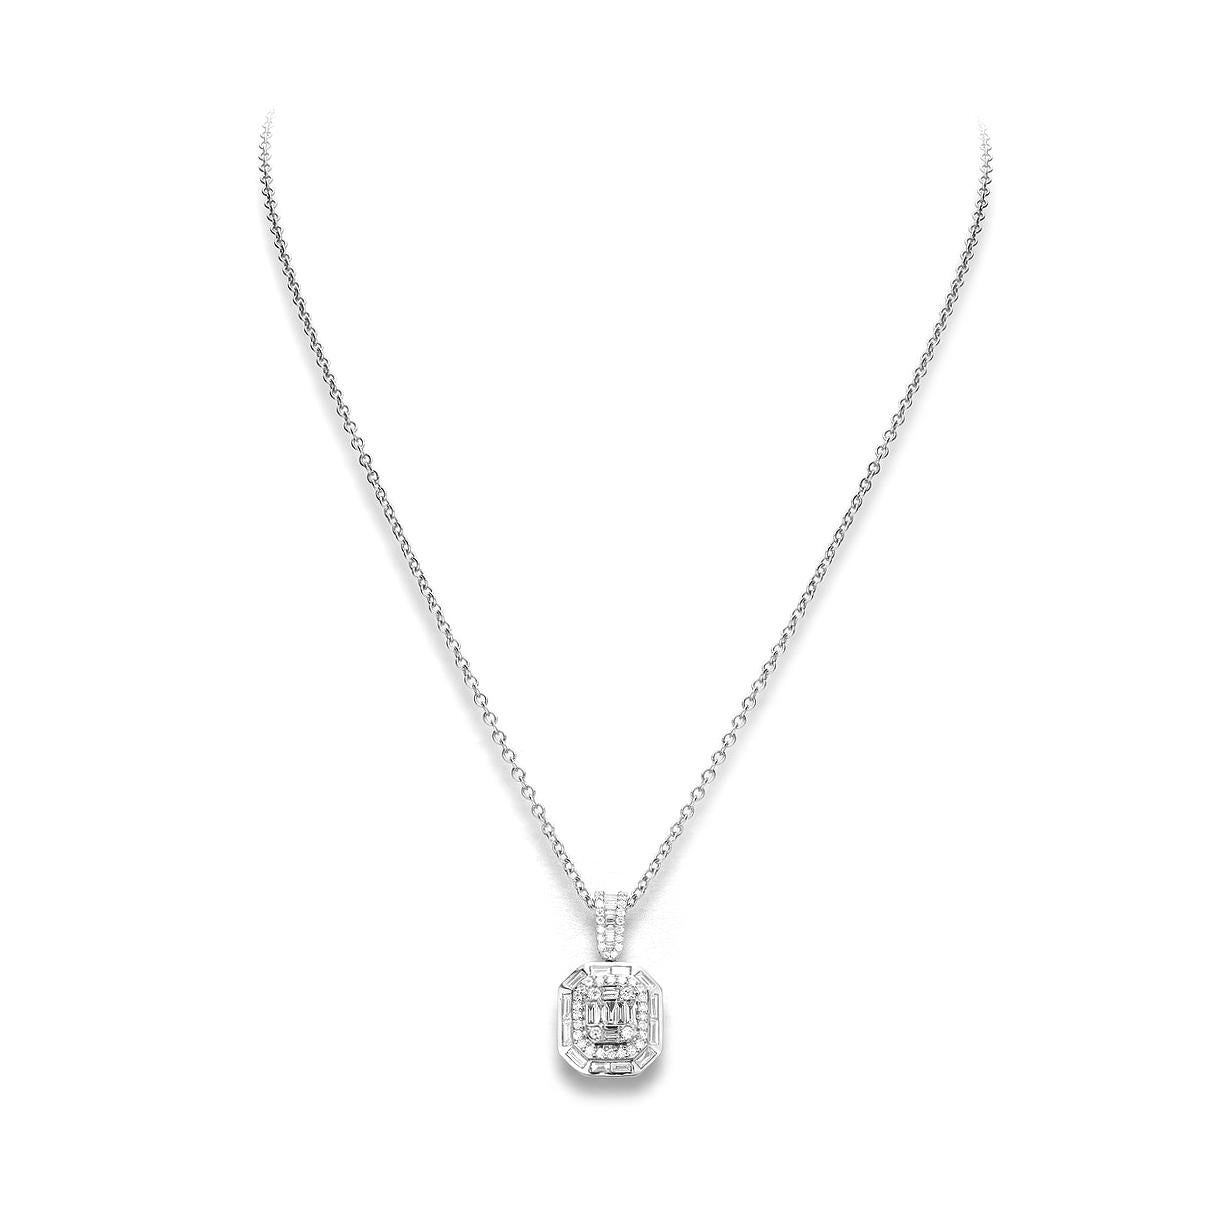 Pendant in 18kt white gold set with 46 diamonds 0.36 cts and 33 baguette cut diamonds 0.70 cts       